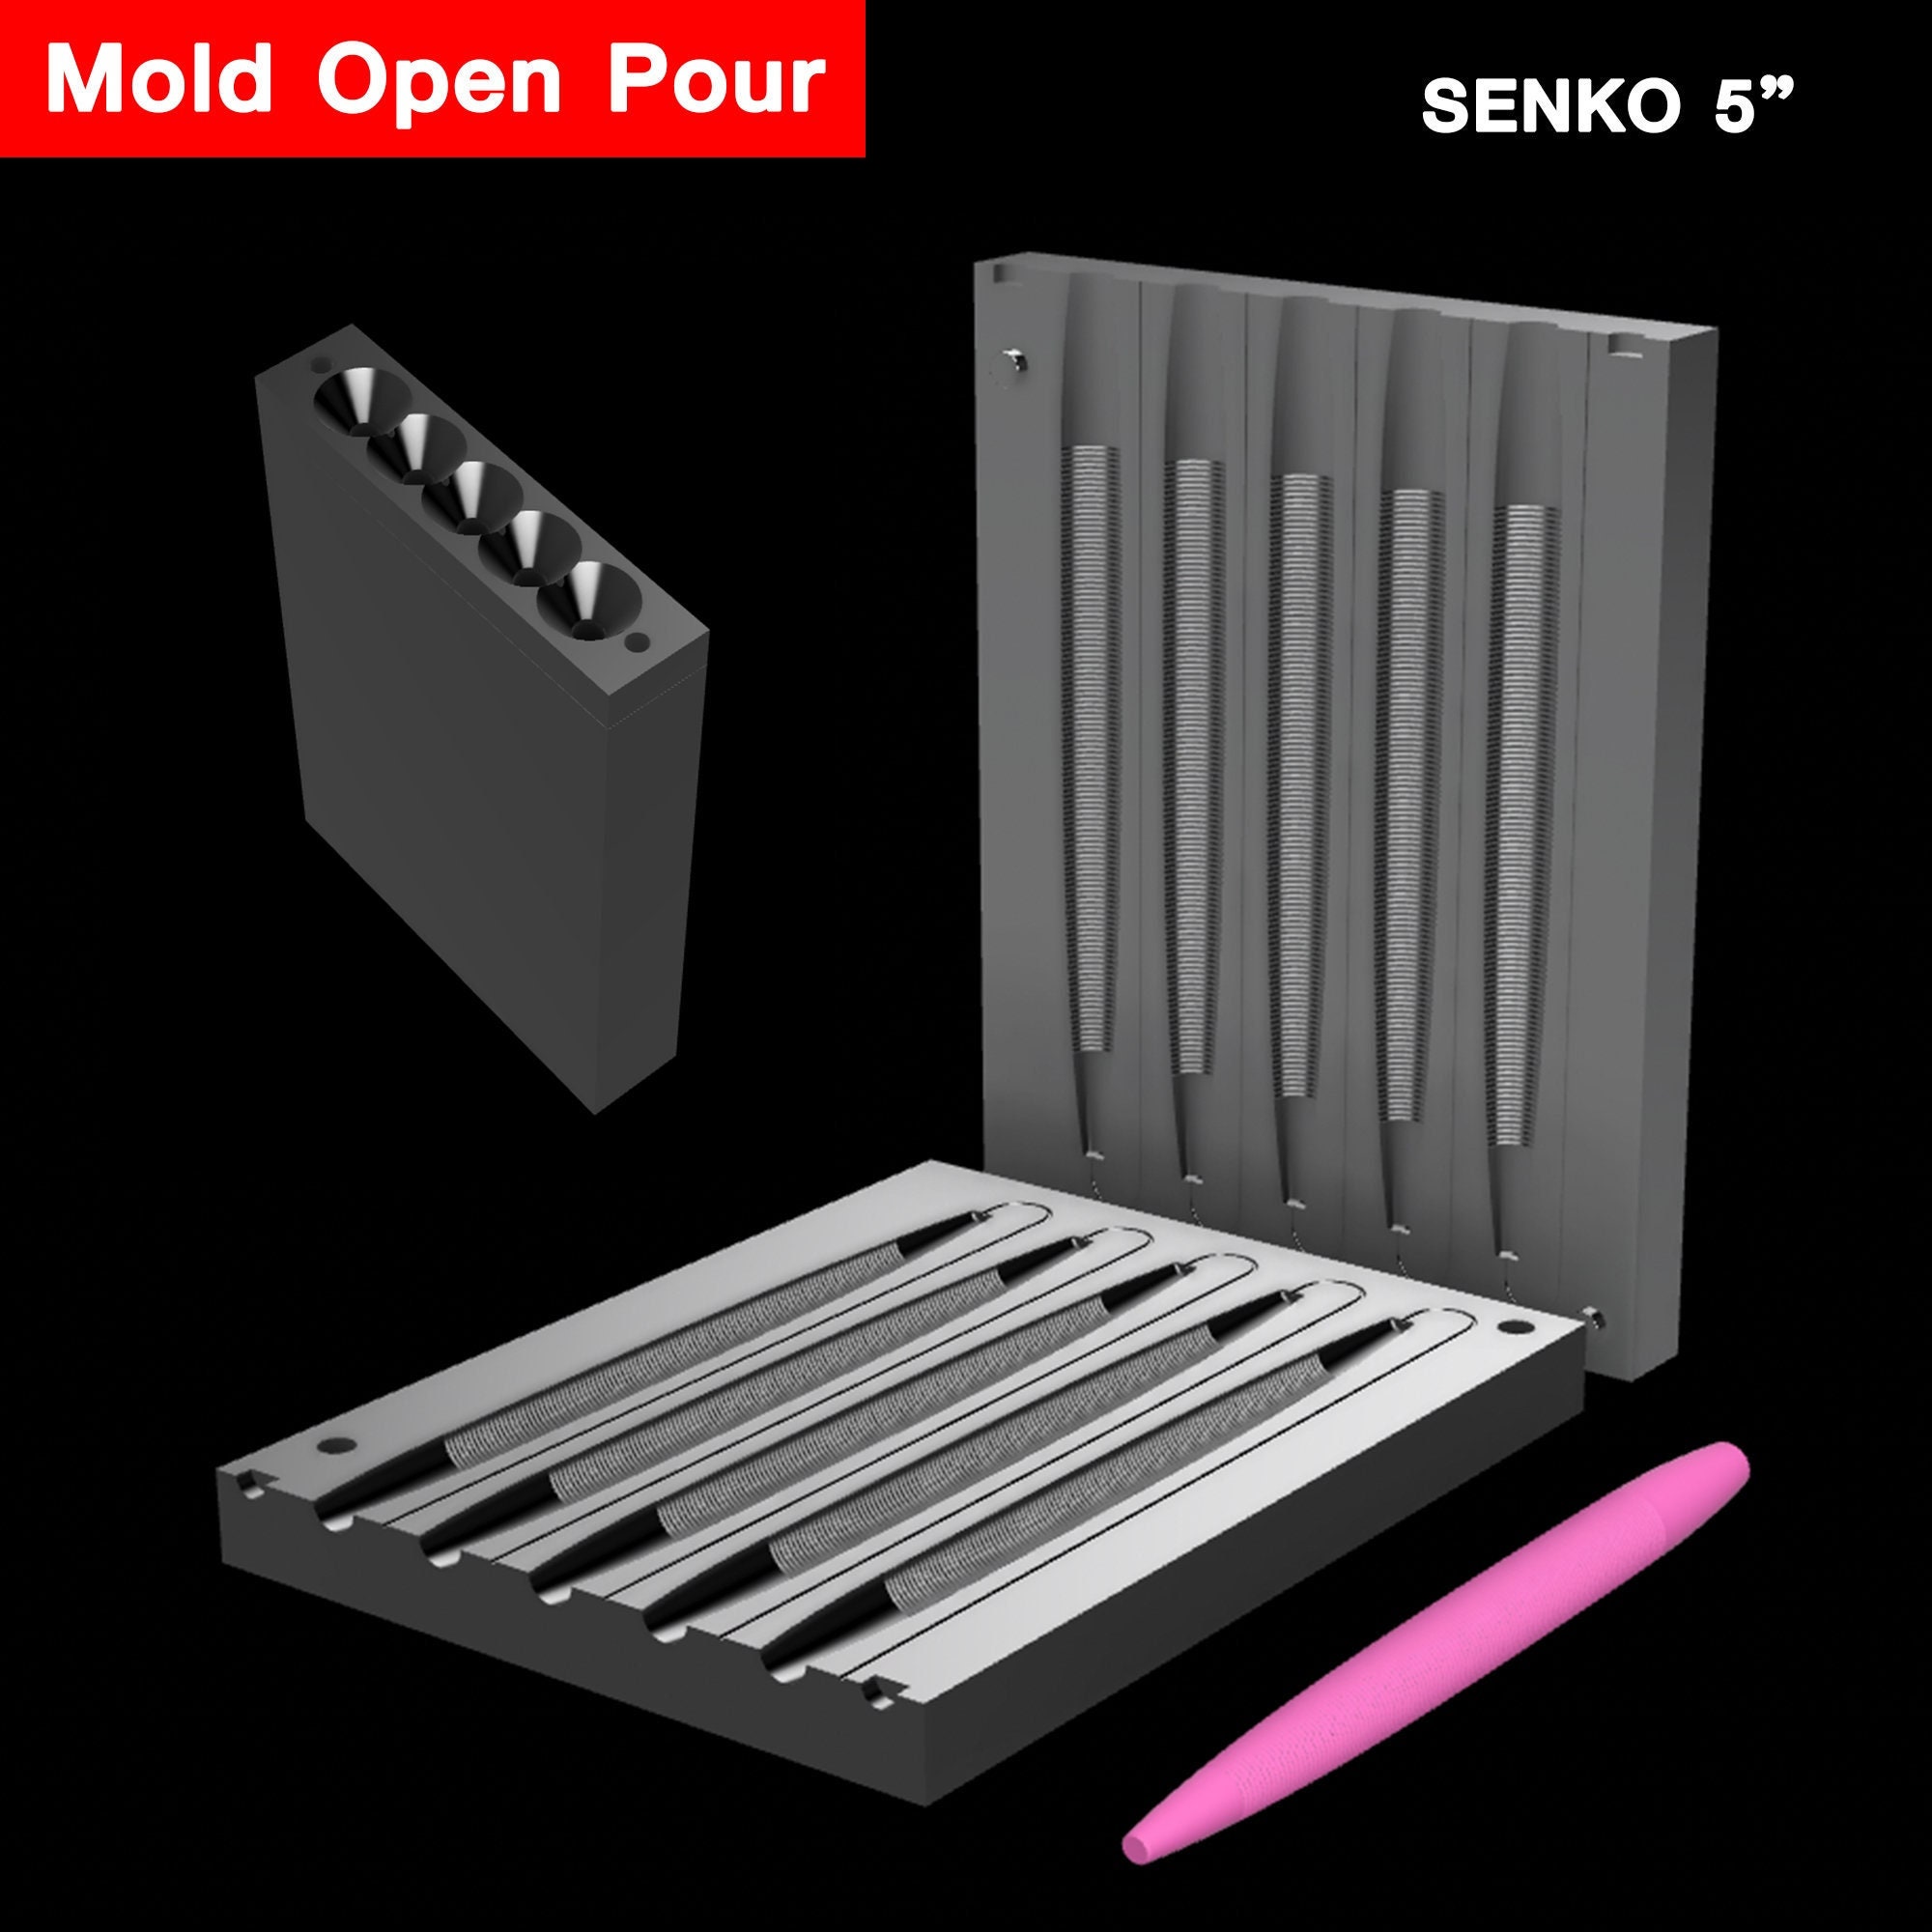 Digital File : Open Pour Mold SENKO 5 Stl, Step File for Cnc and 3d Print -   Canada